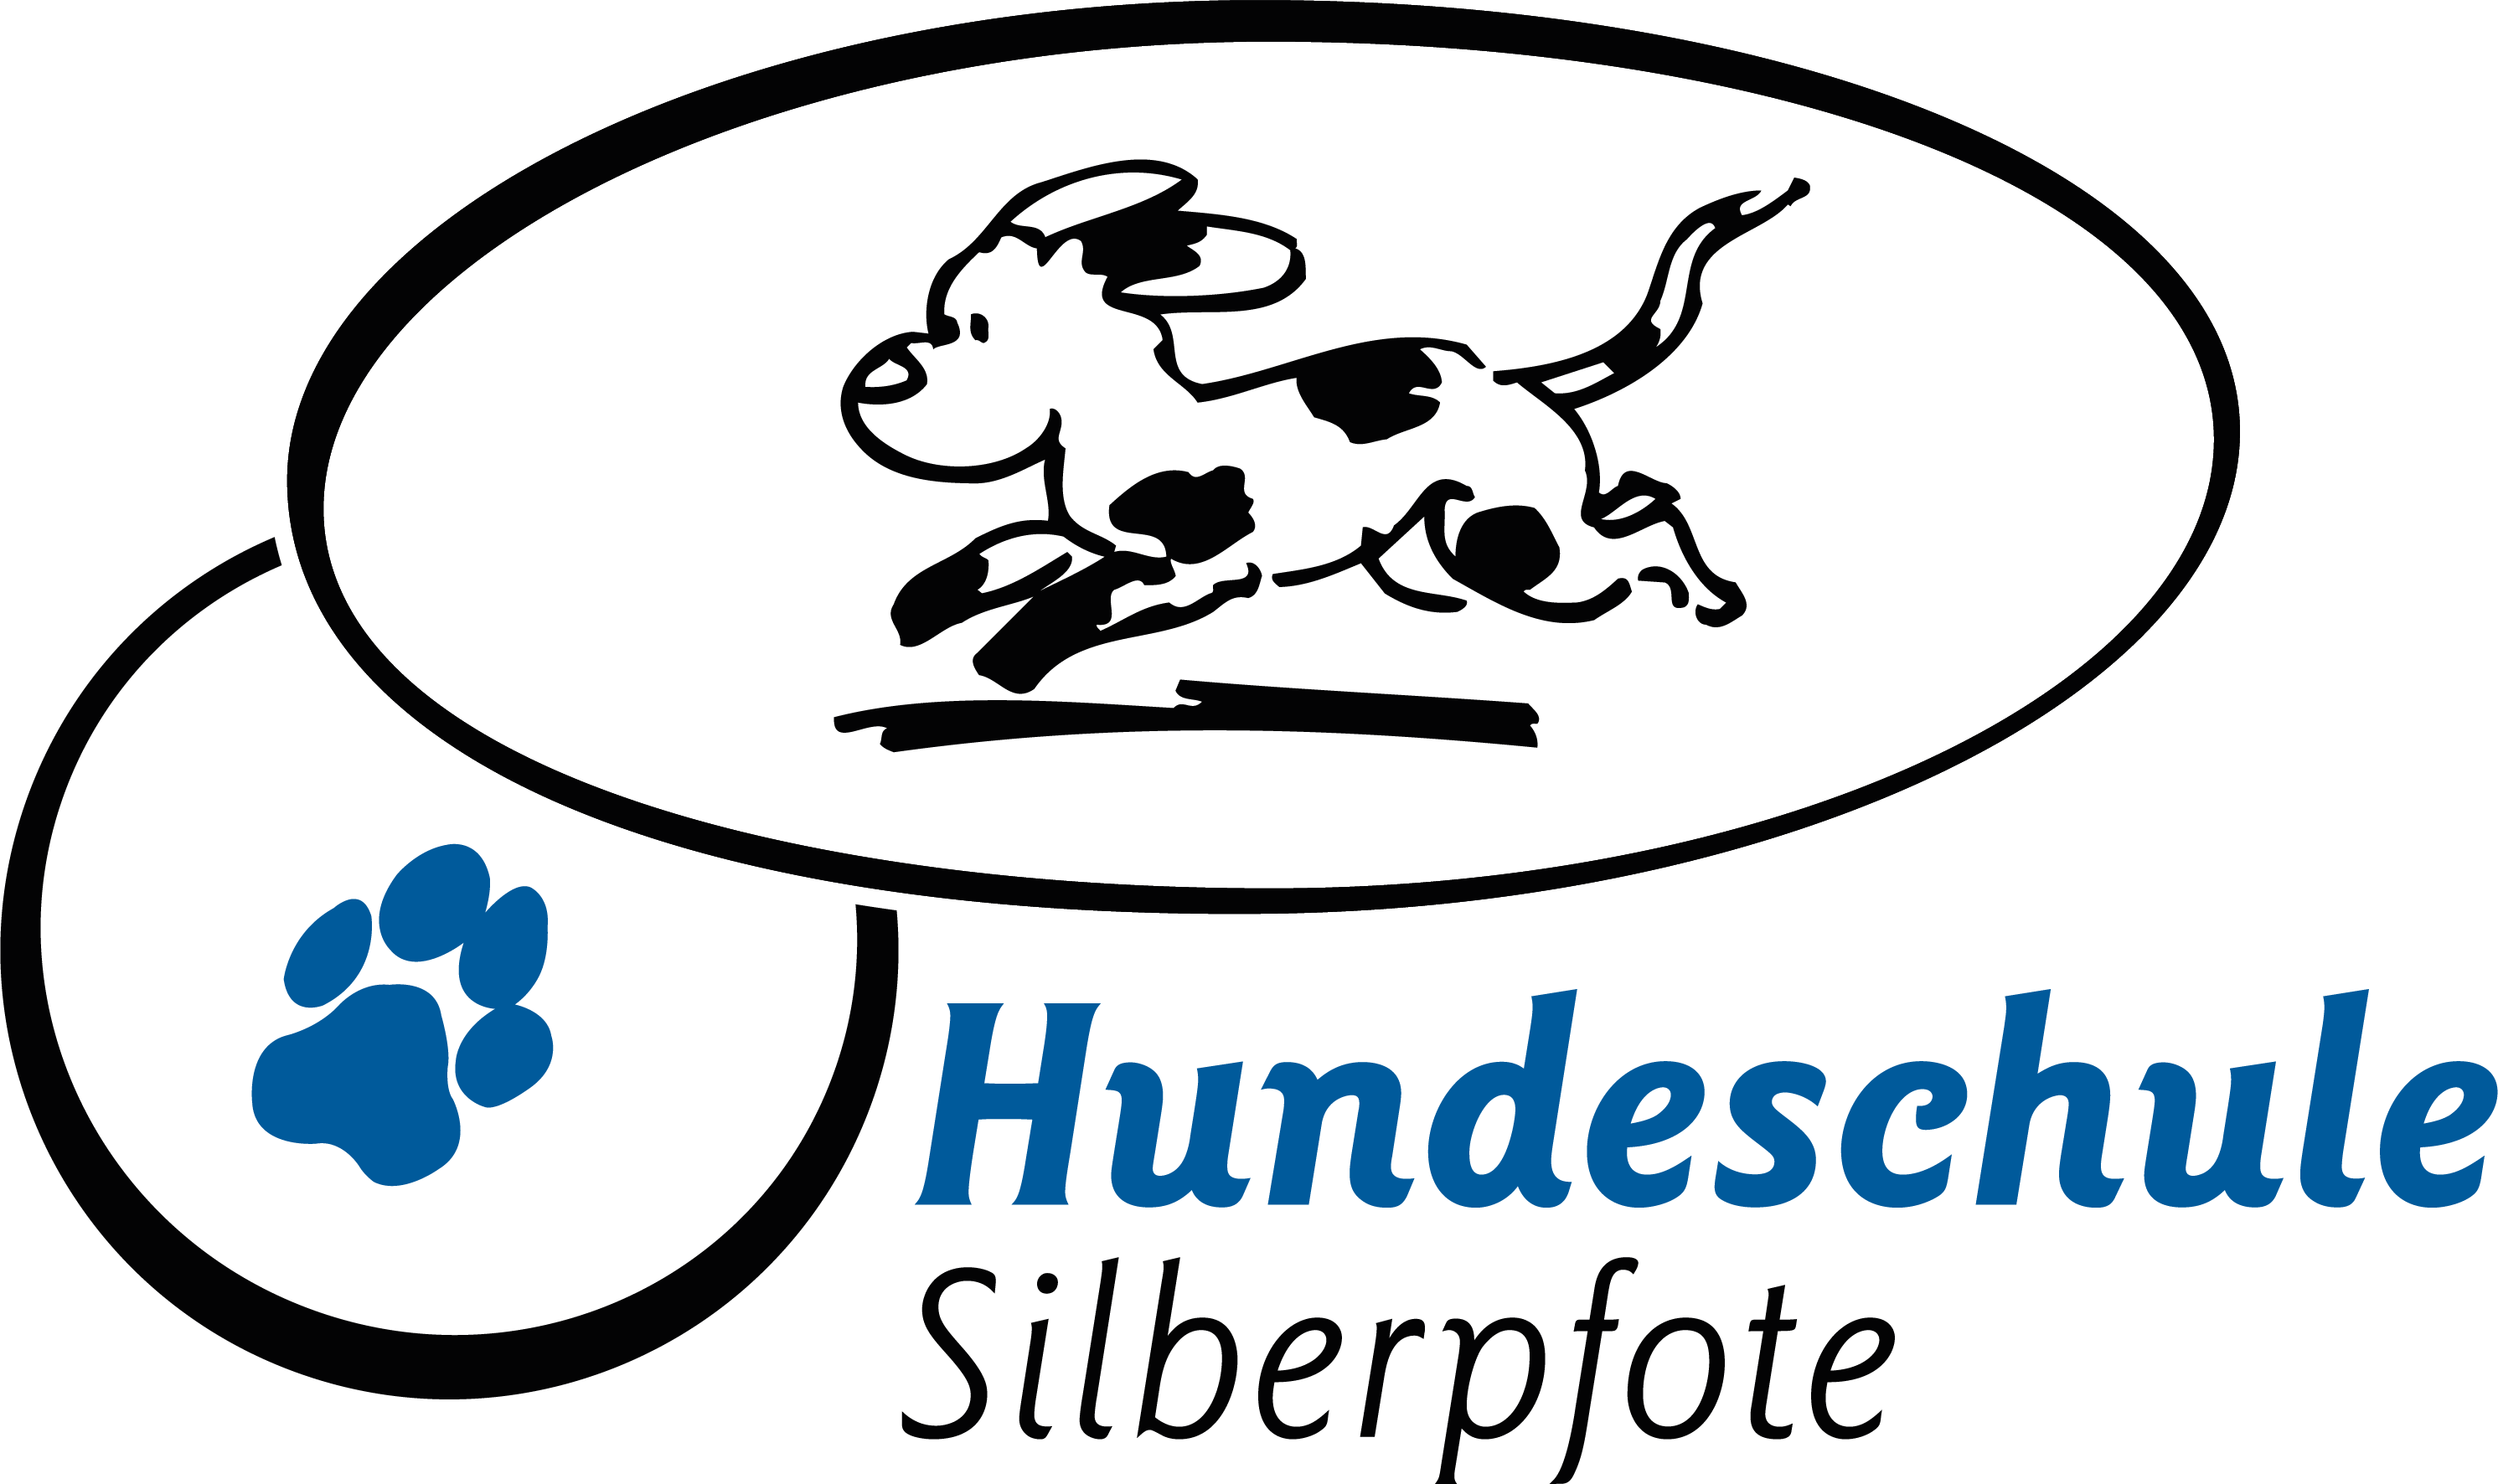 image-11832746-Hundeschule_Silberpfote-c20ad.png